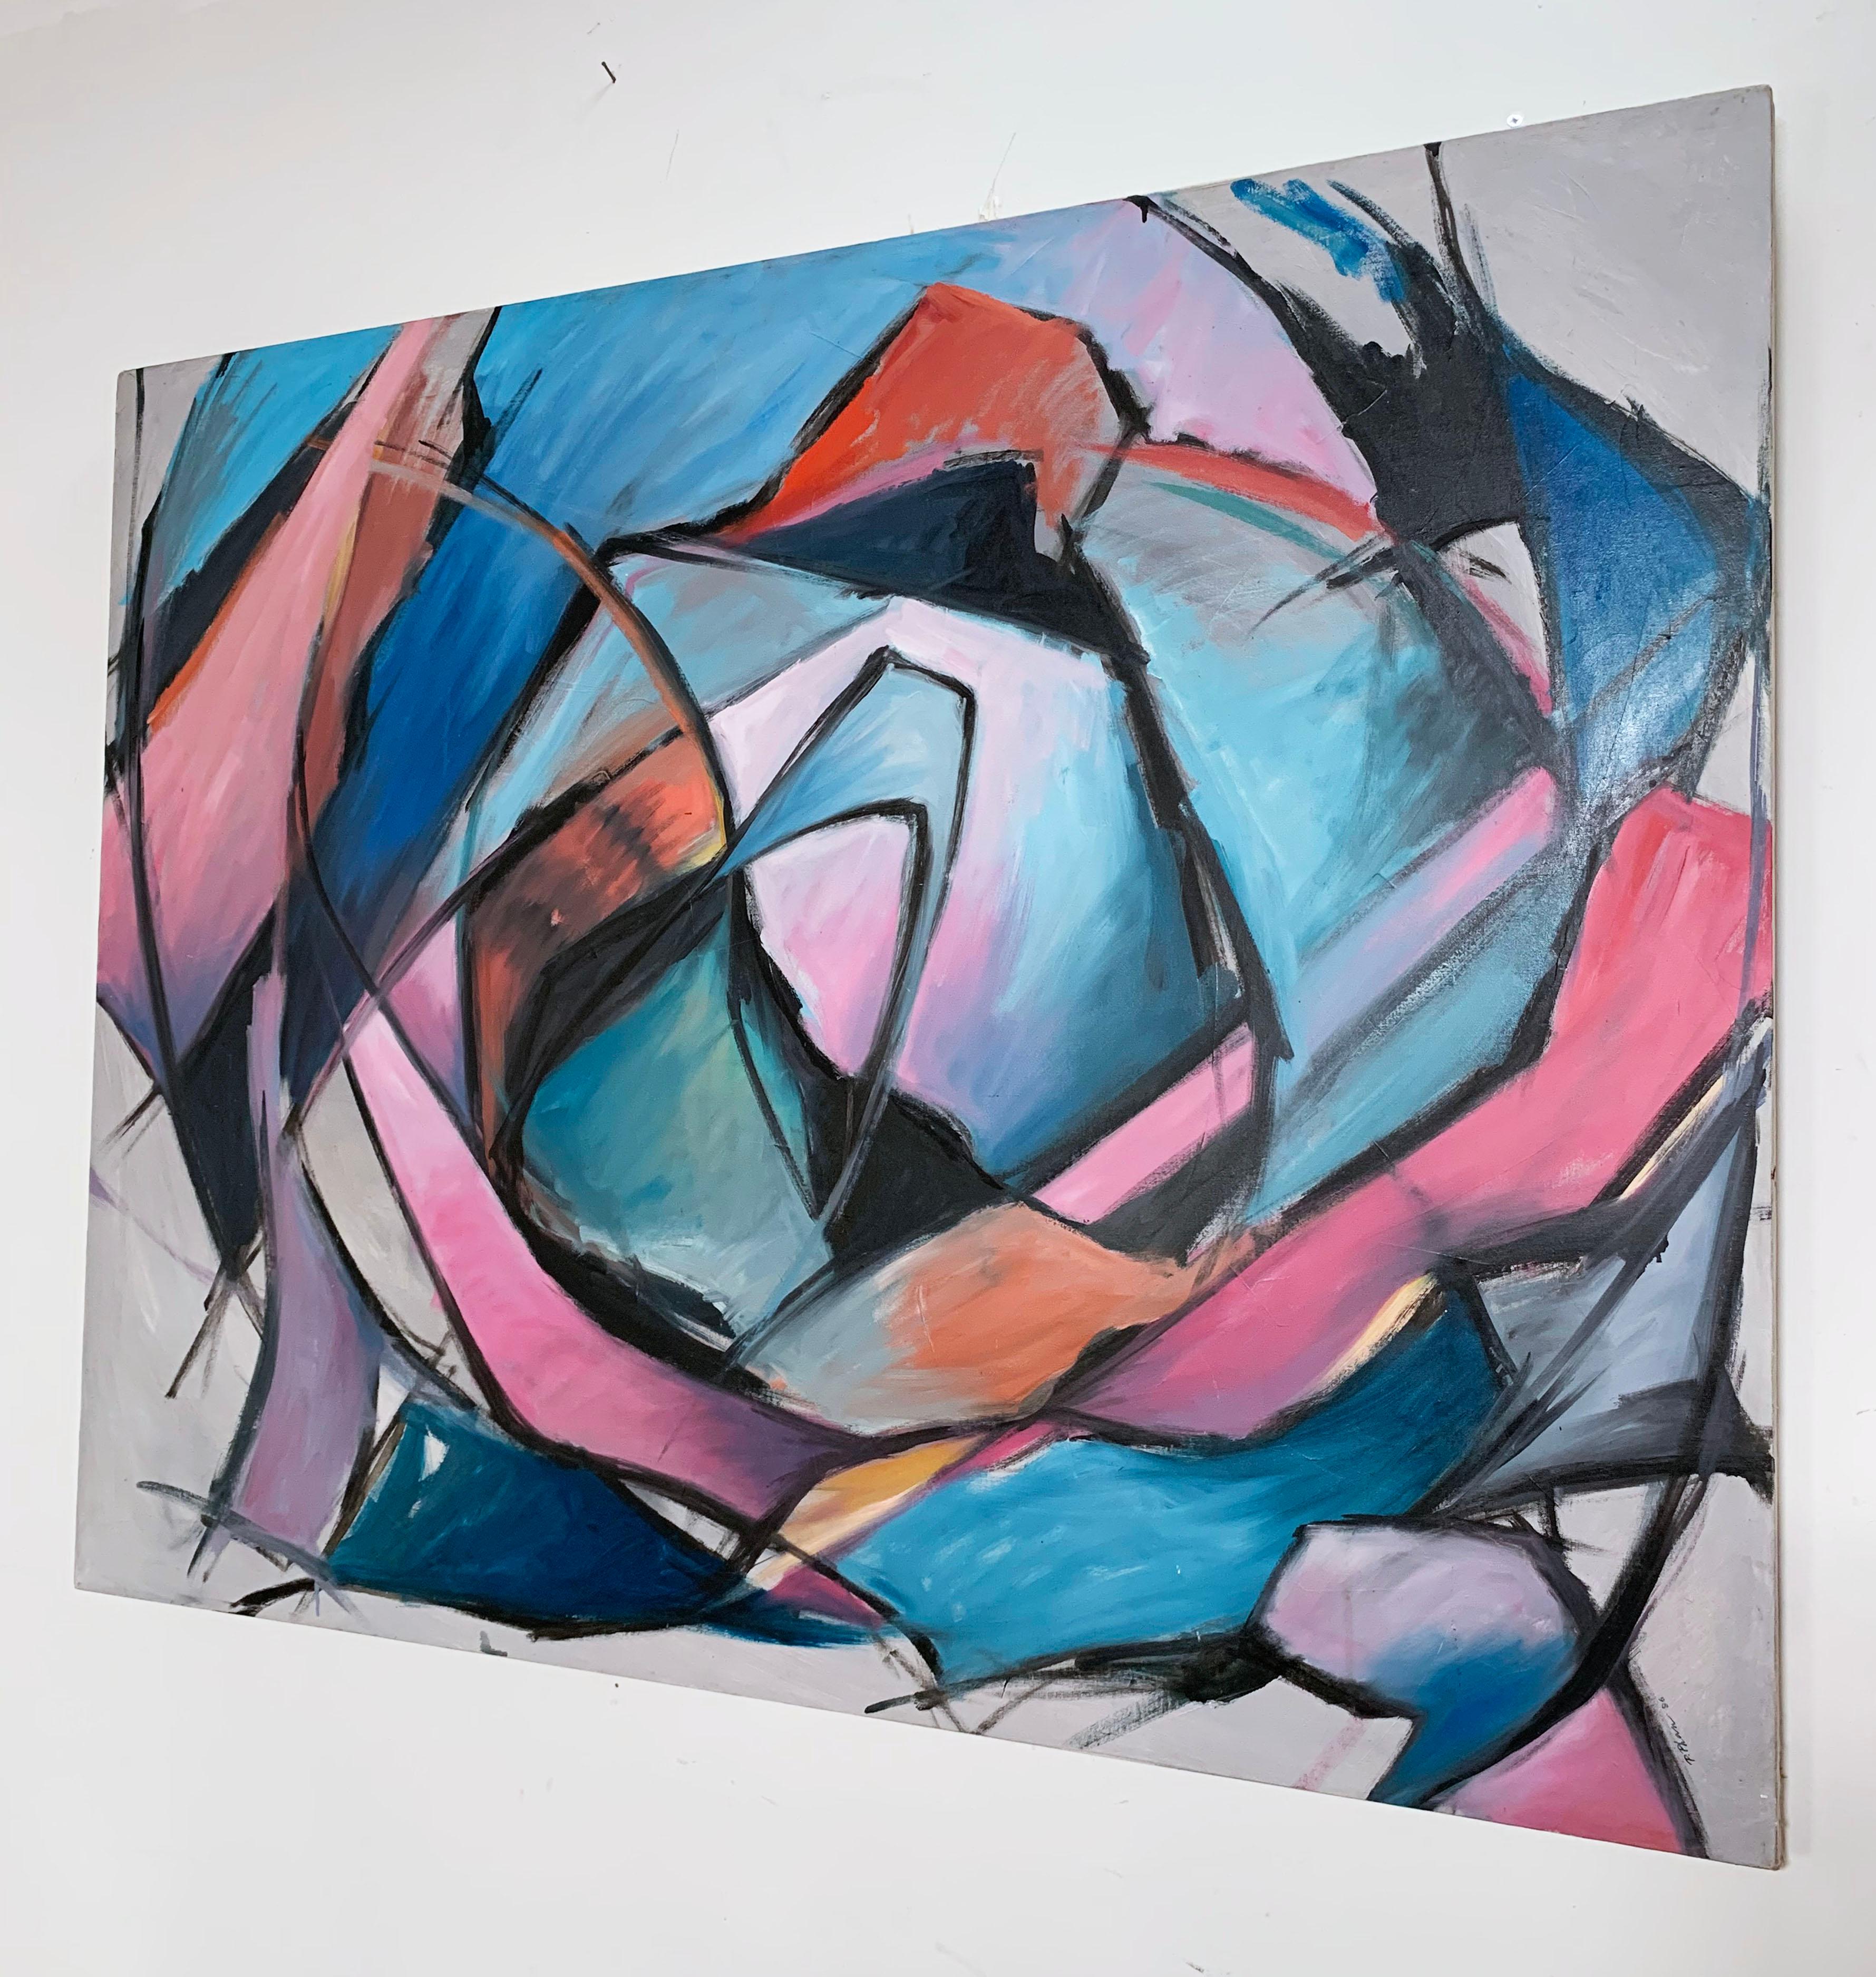 Vibrant large (56” x 44”) abstract painting by University of the Arts, Philadelphia, honors graduate Phuc Phan, dated 1986.